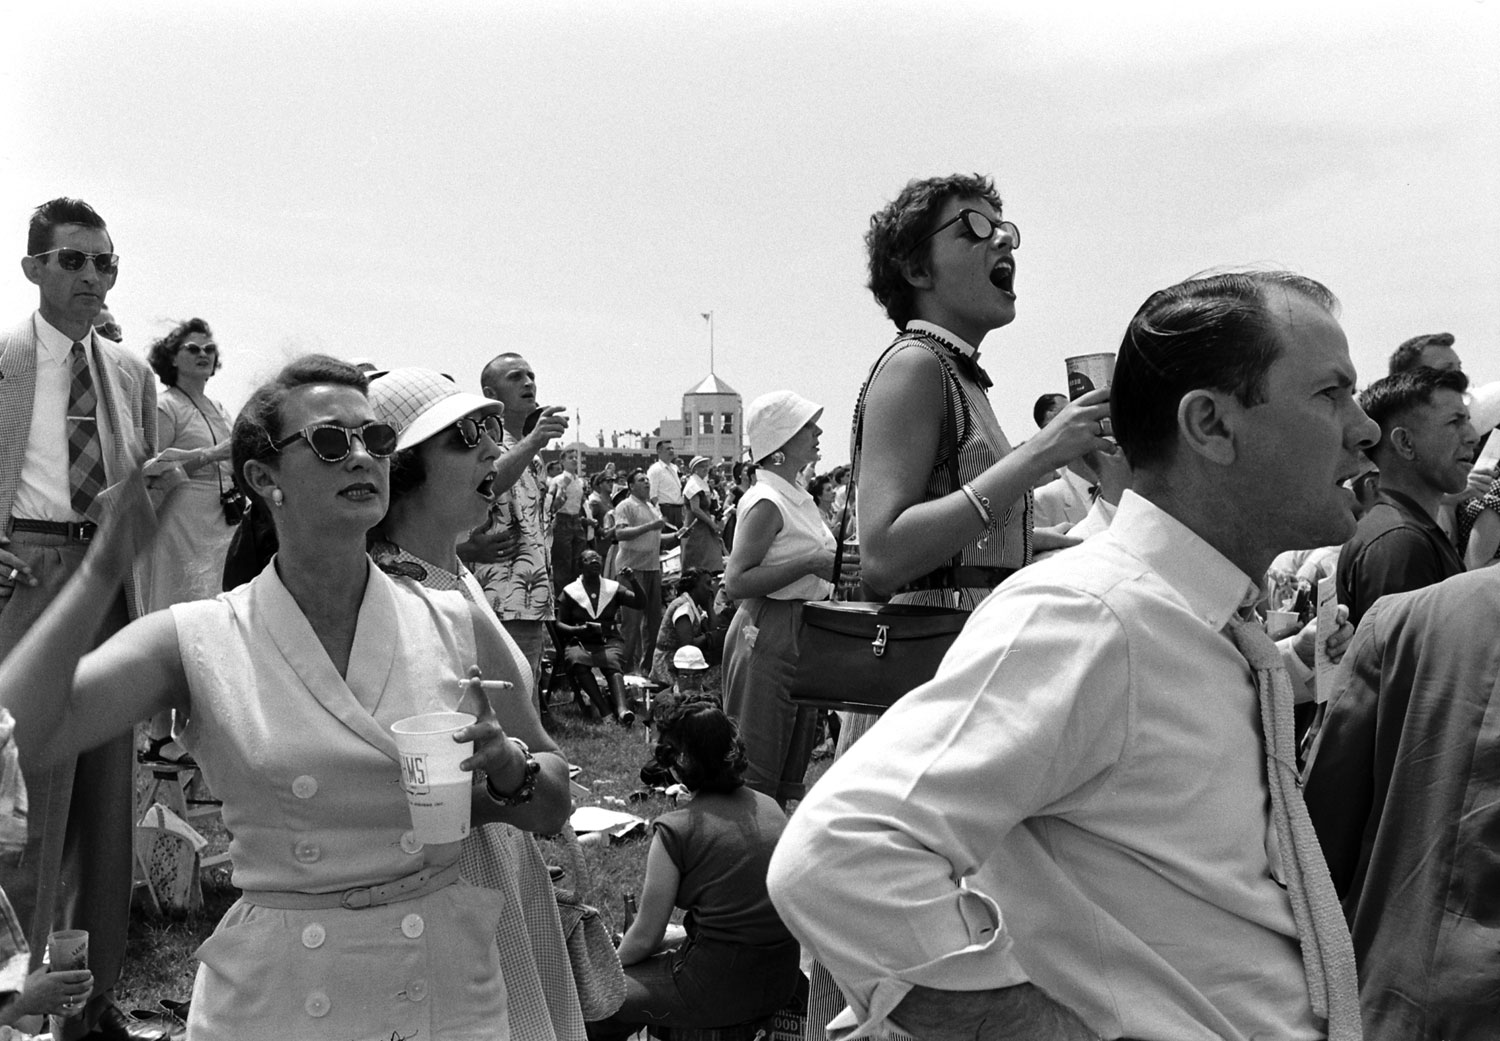 Spectators at Churchill Downs on Derby day, 1955.